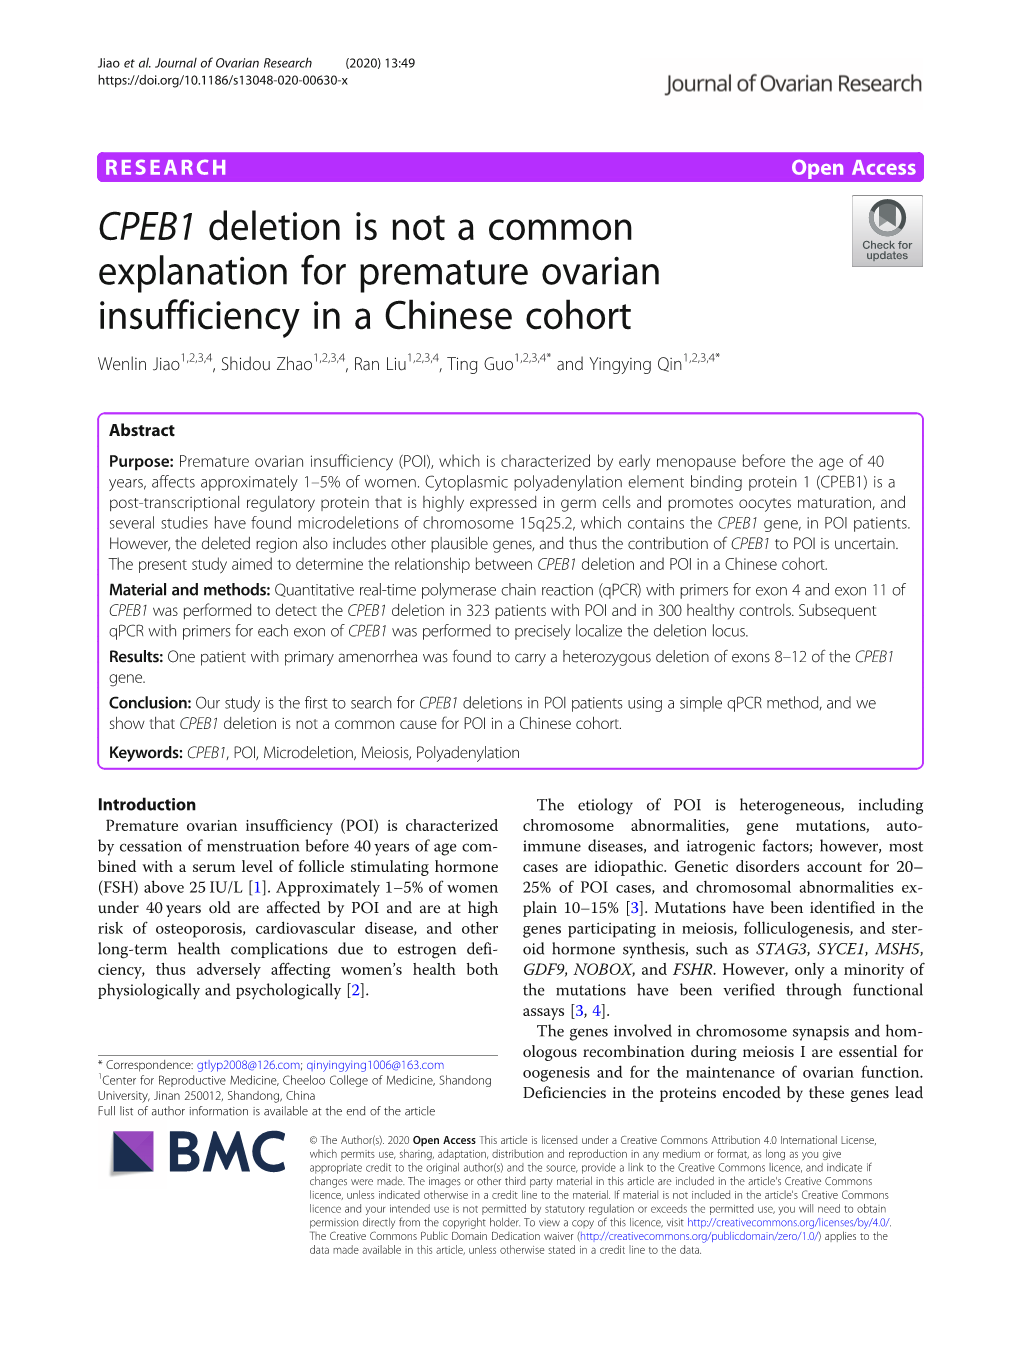 CPEB1 Deletion Is Not a Common Explanation for Premature Ovarian